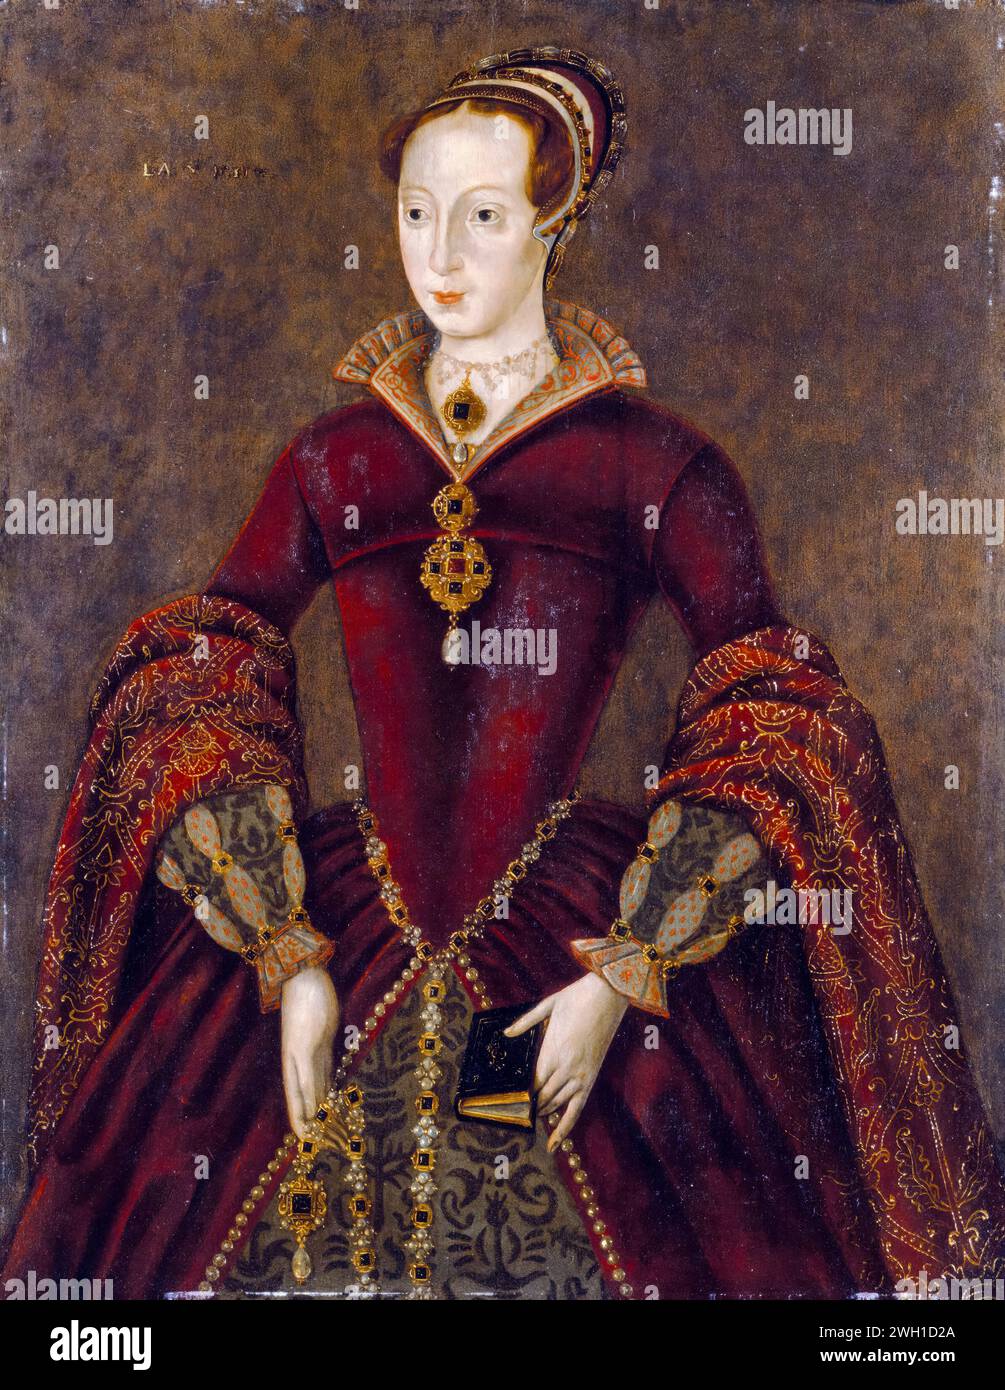 Lady Jane Grey (circa 1537-1554) also known as Lady Jane Dudley, 'The Streatham Portrait', portrait painting in oil on panel, 1590-1600 Stock Photo